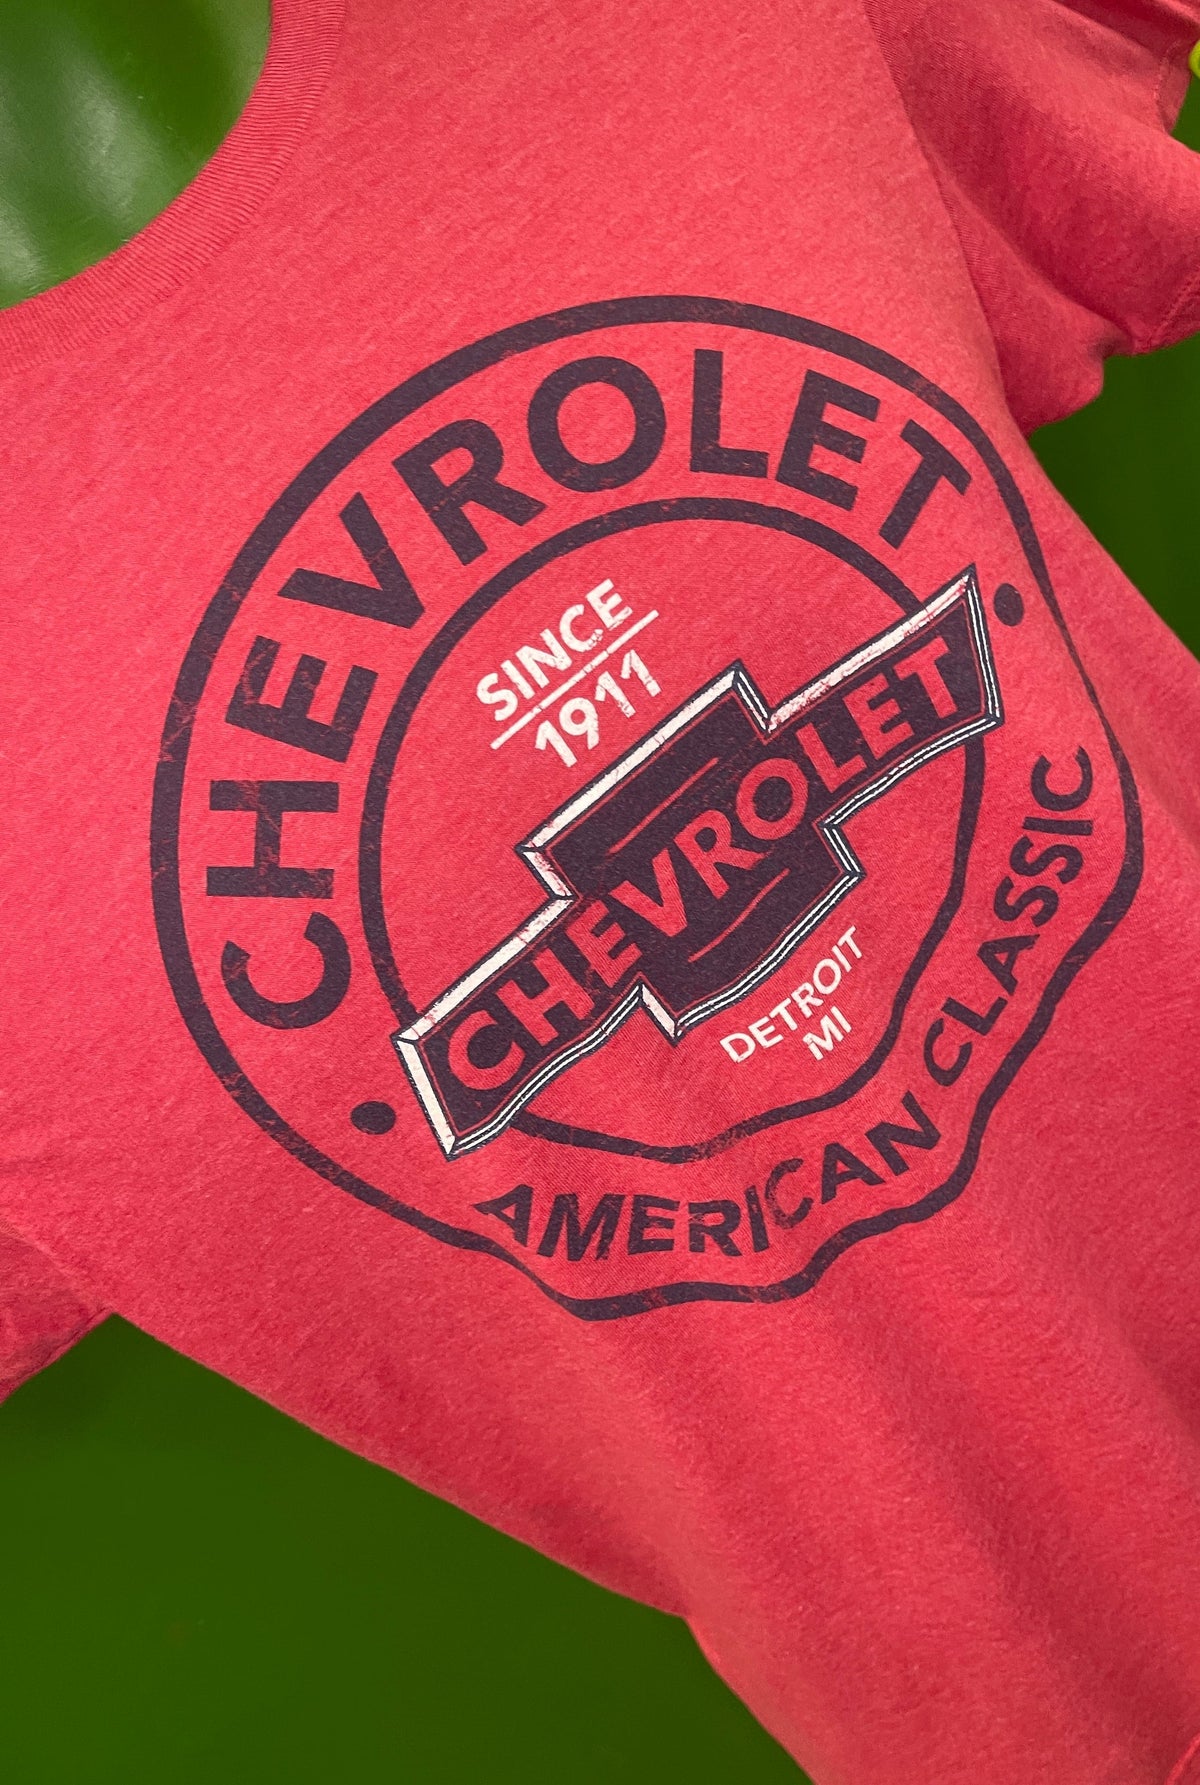 Chevrolet American Classic Soft Red T-Shirt Men's Small